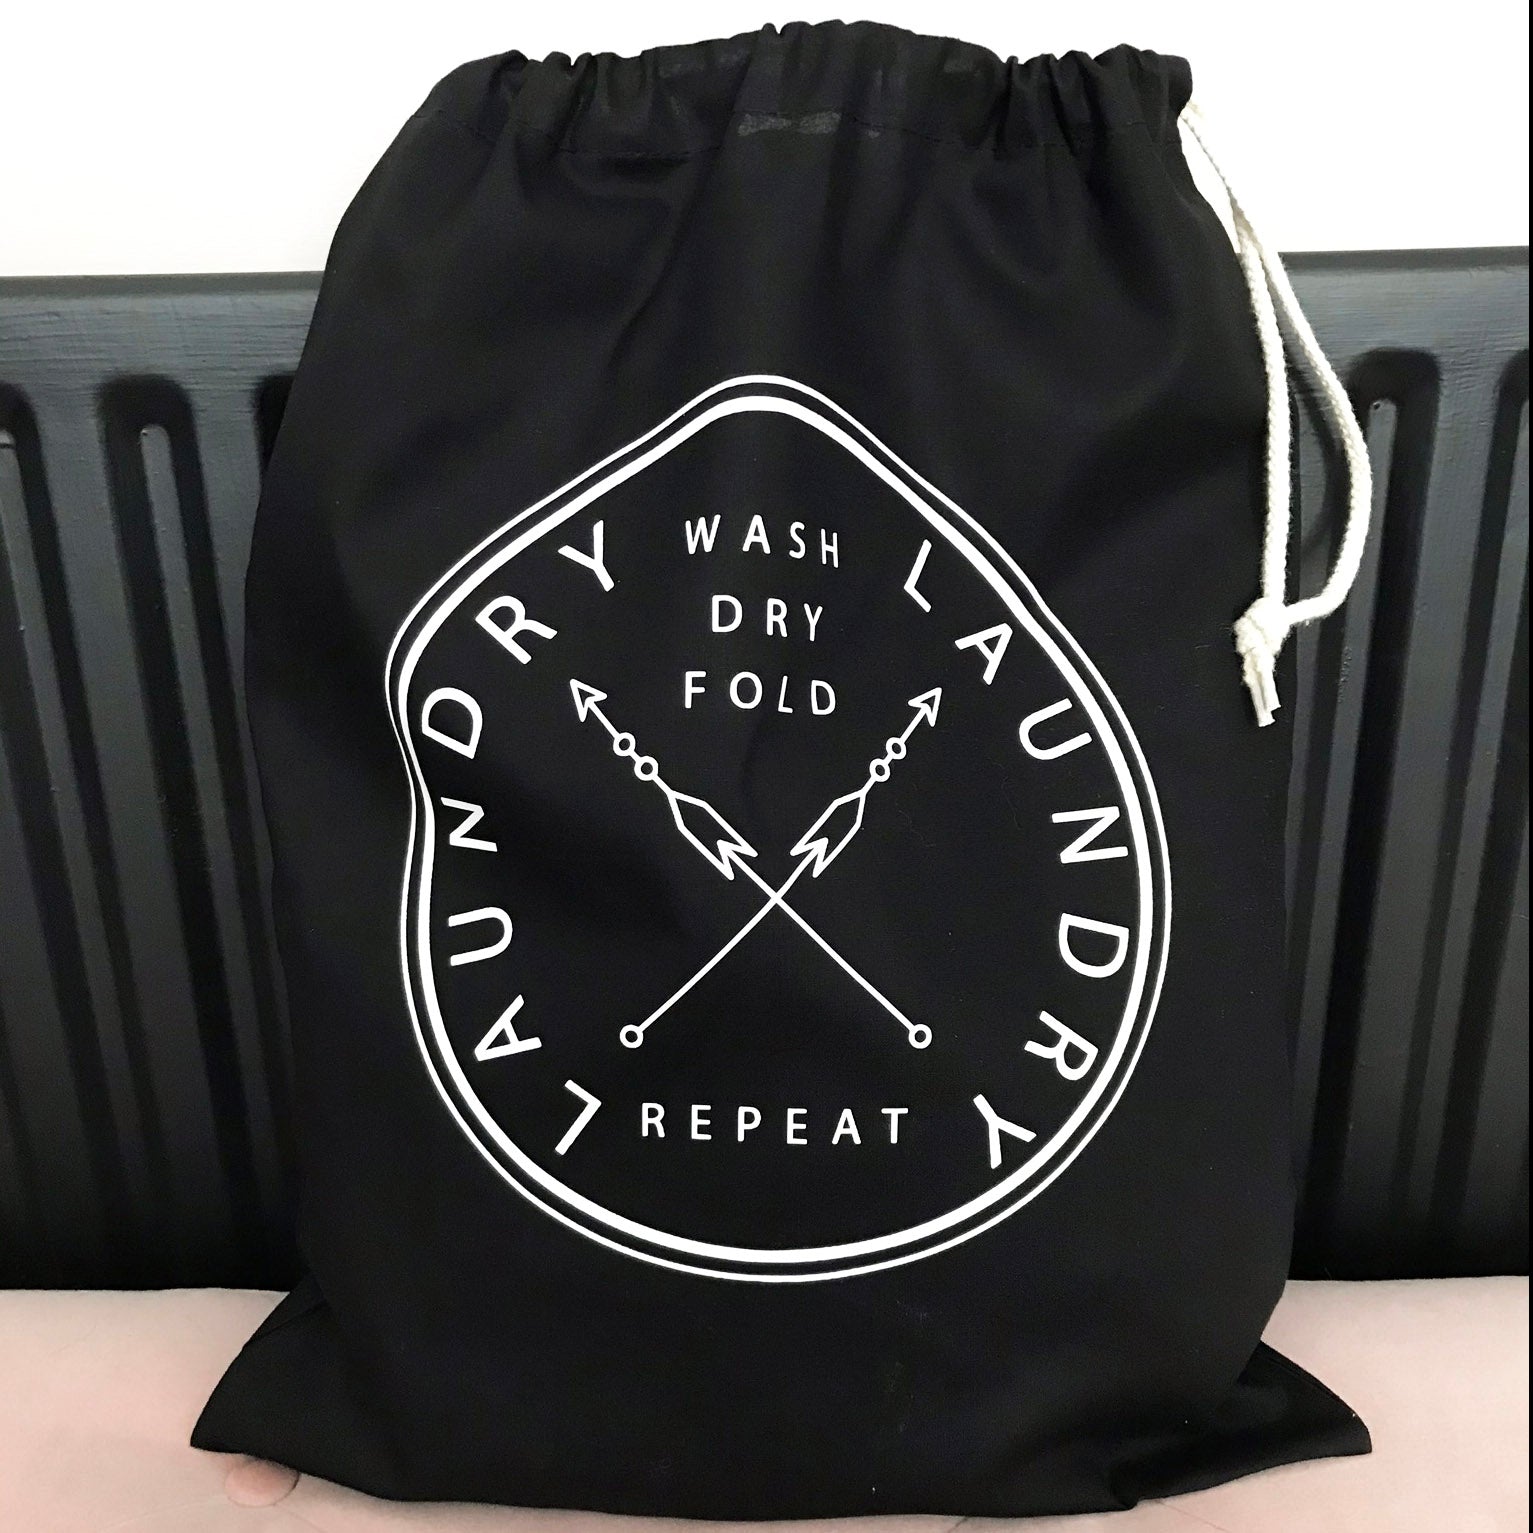 Wash Dry Fold Repeat, Laundry Bag in Black